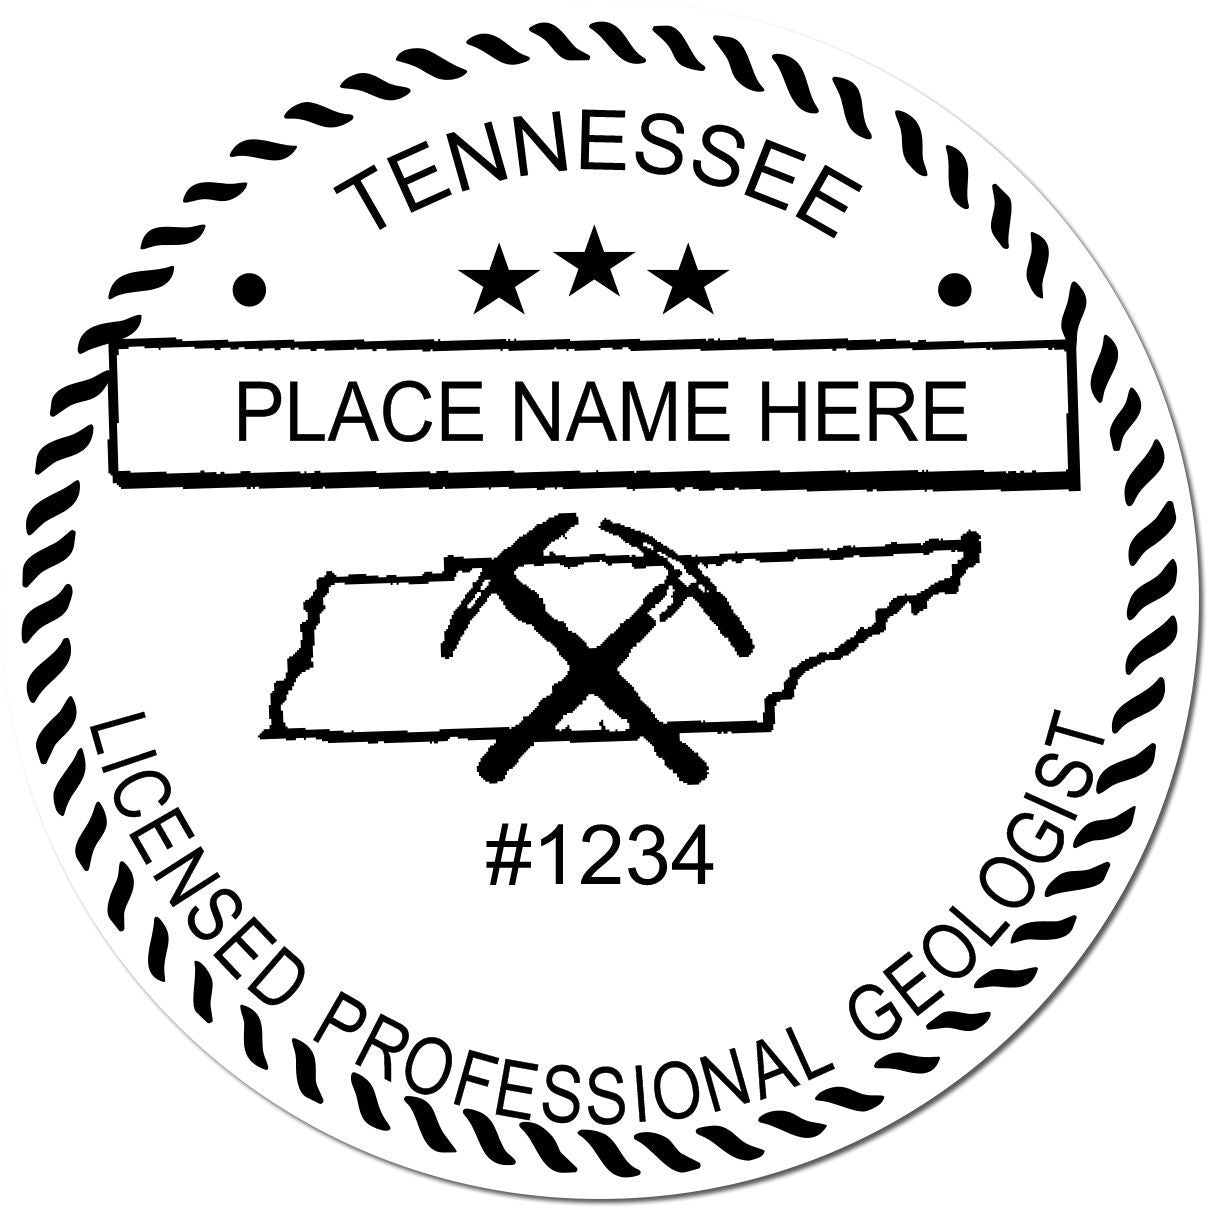 This paper is stamped with a sample imprint of the Digital Tennessee Geologist Stamp, Electronic Seal for Tennessee Geologist, signifying its quality and reliability.